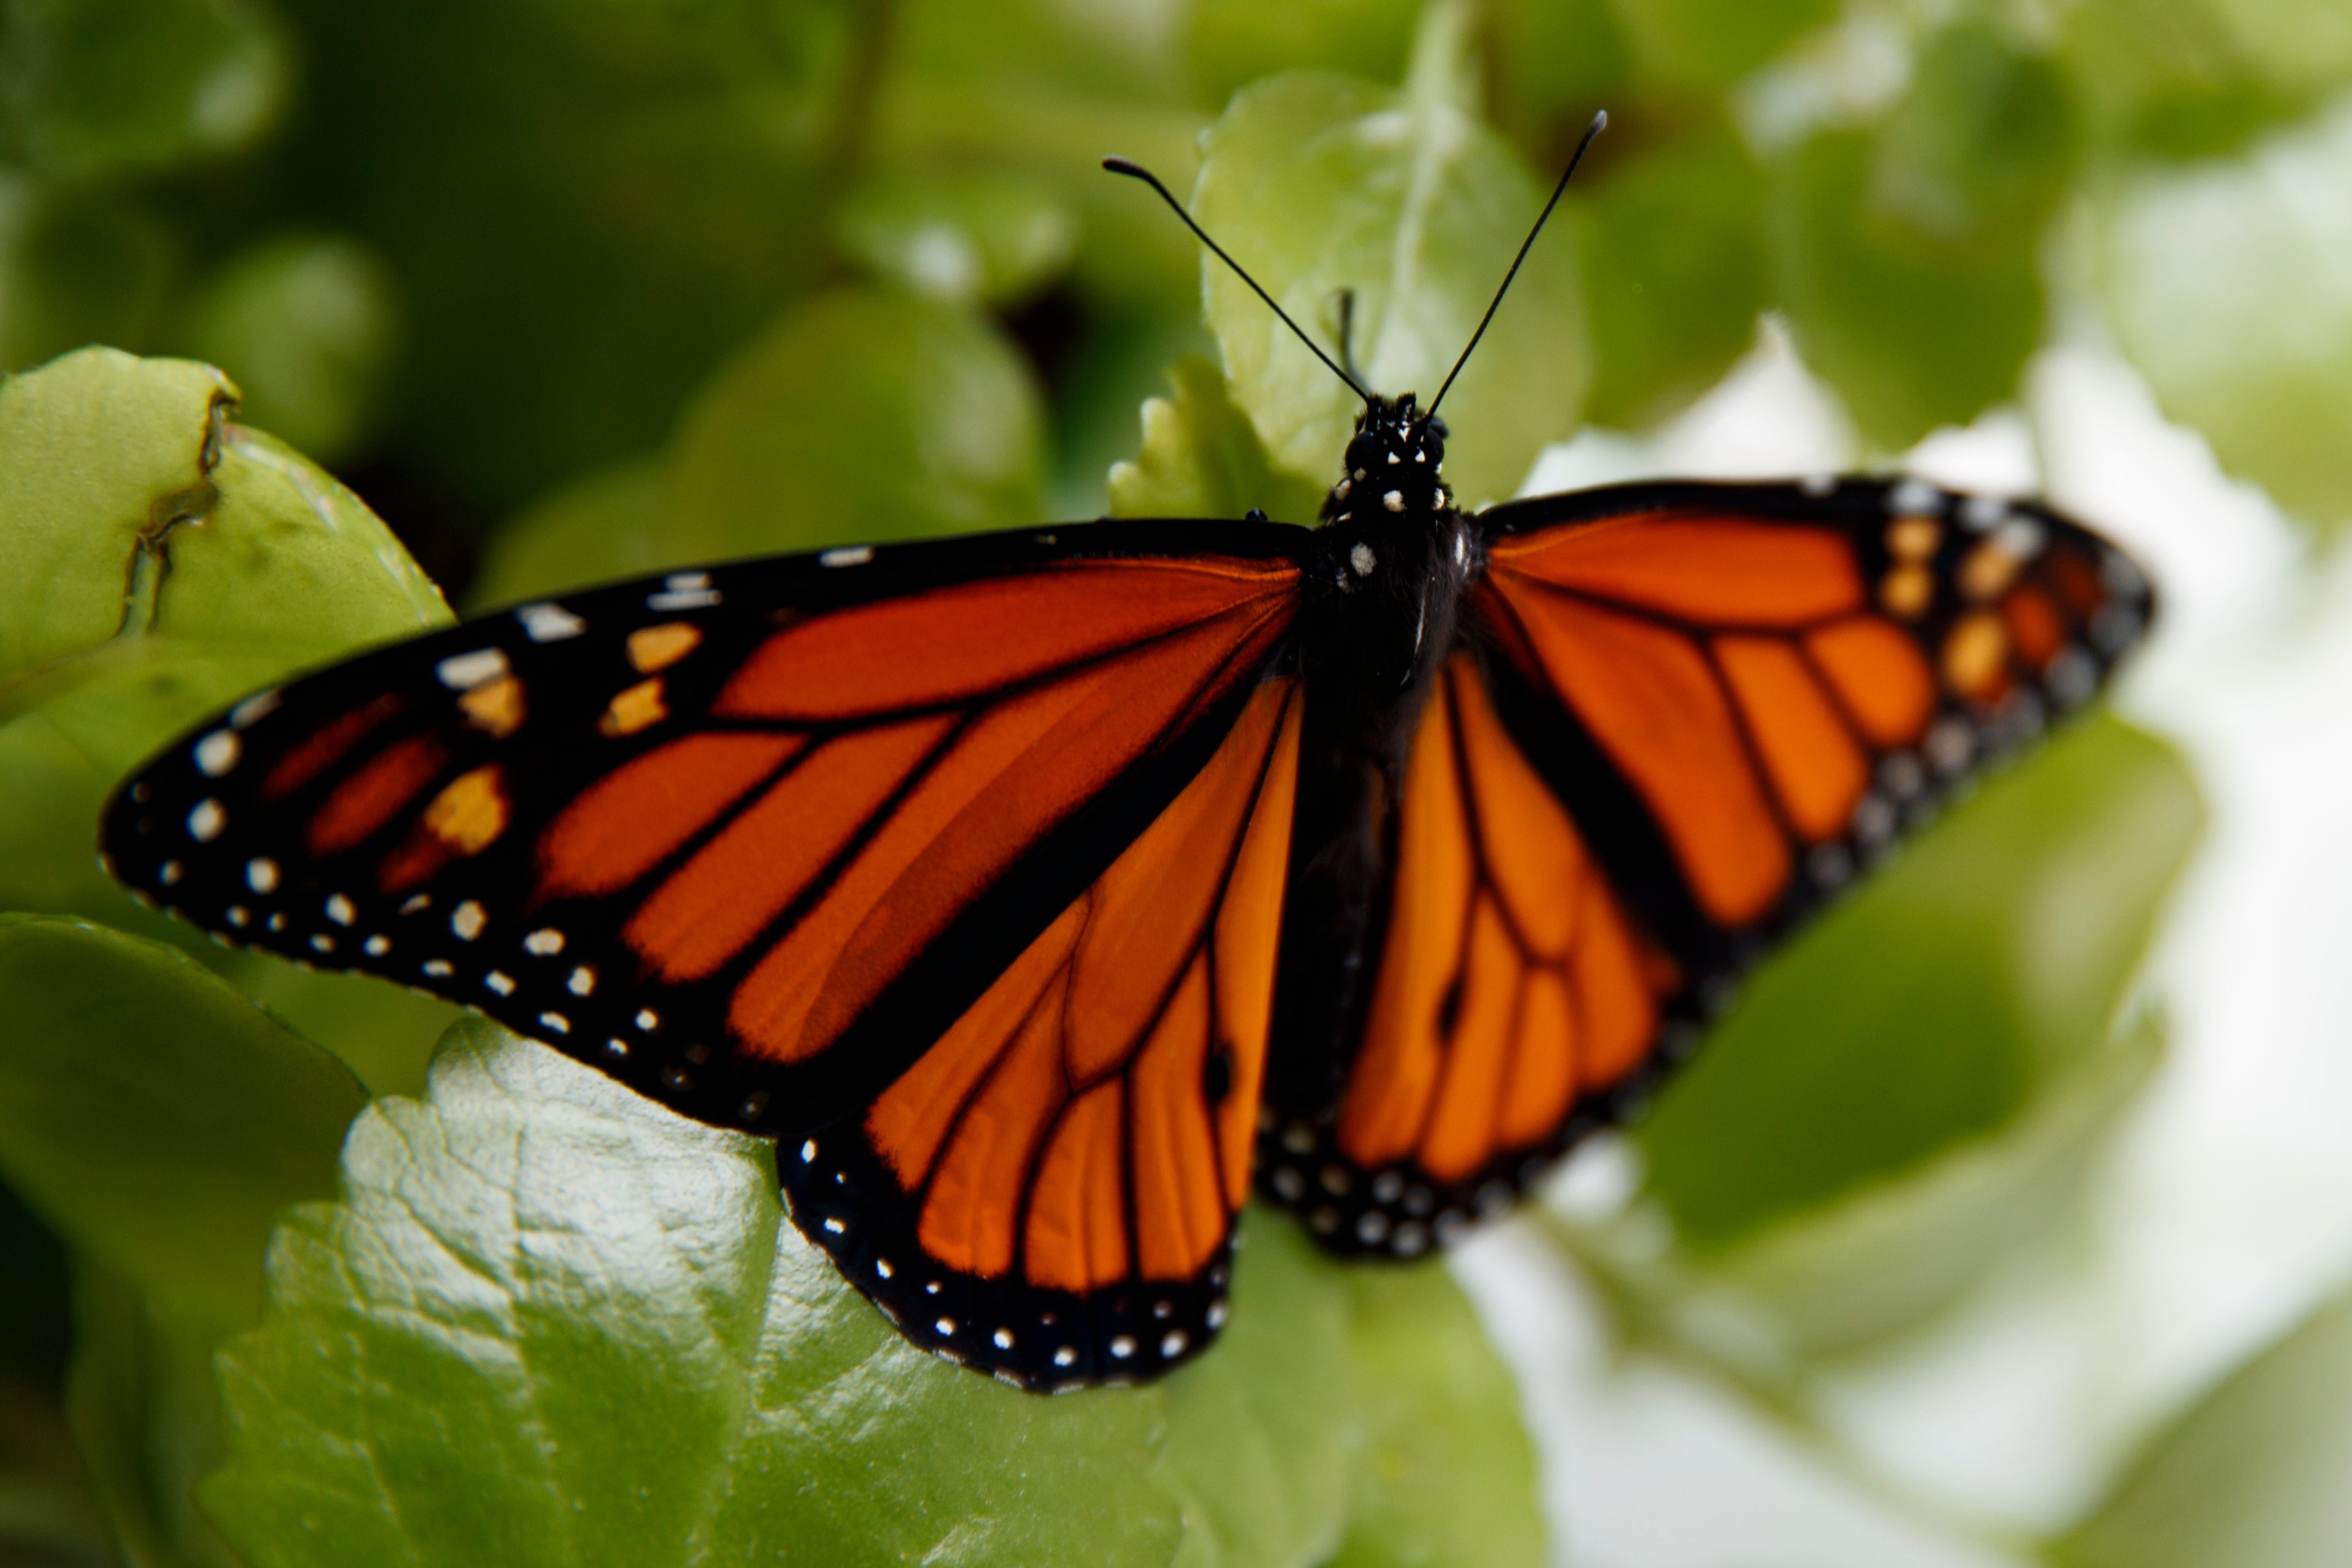 Monarch butterfly populations are under threat